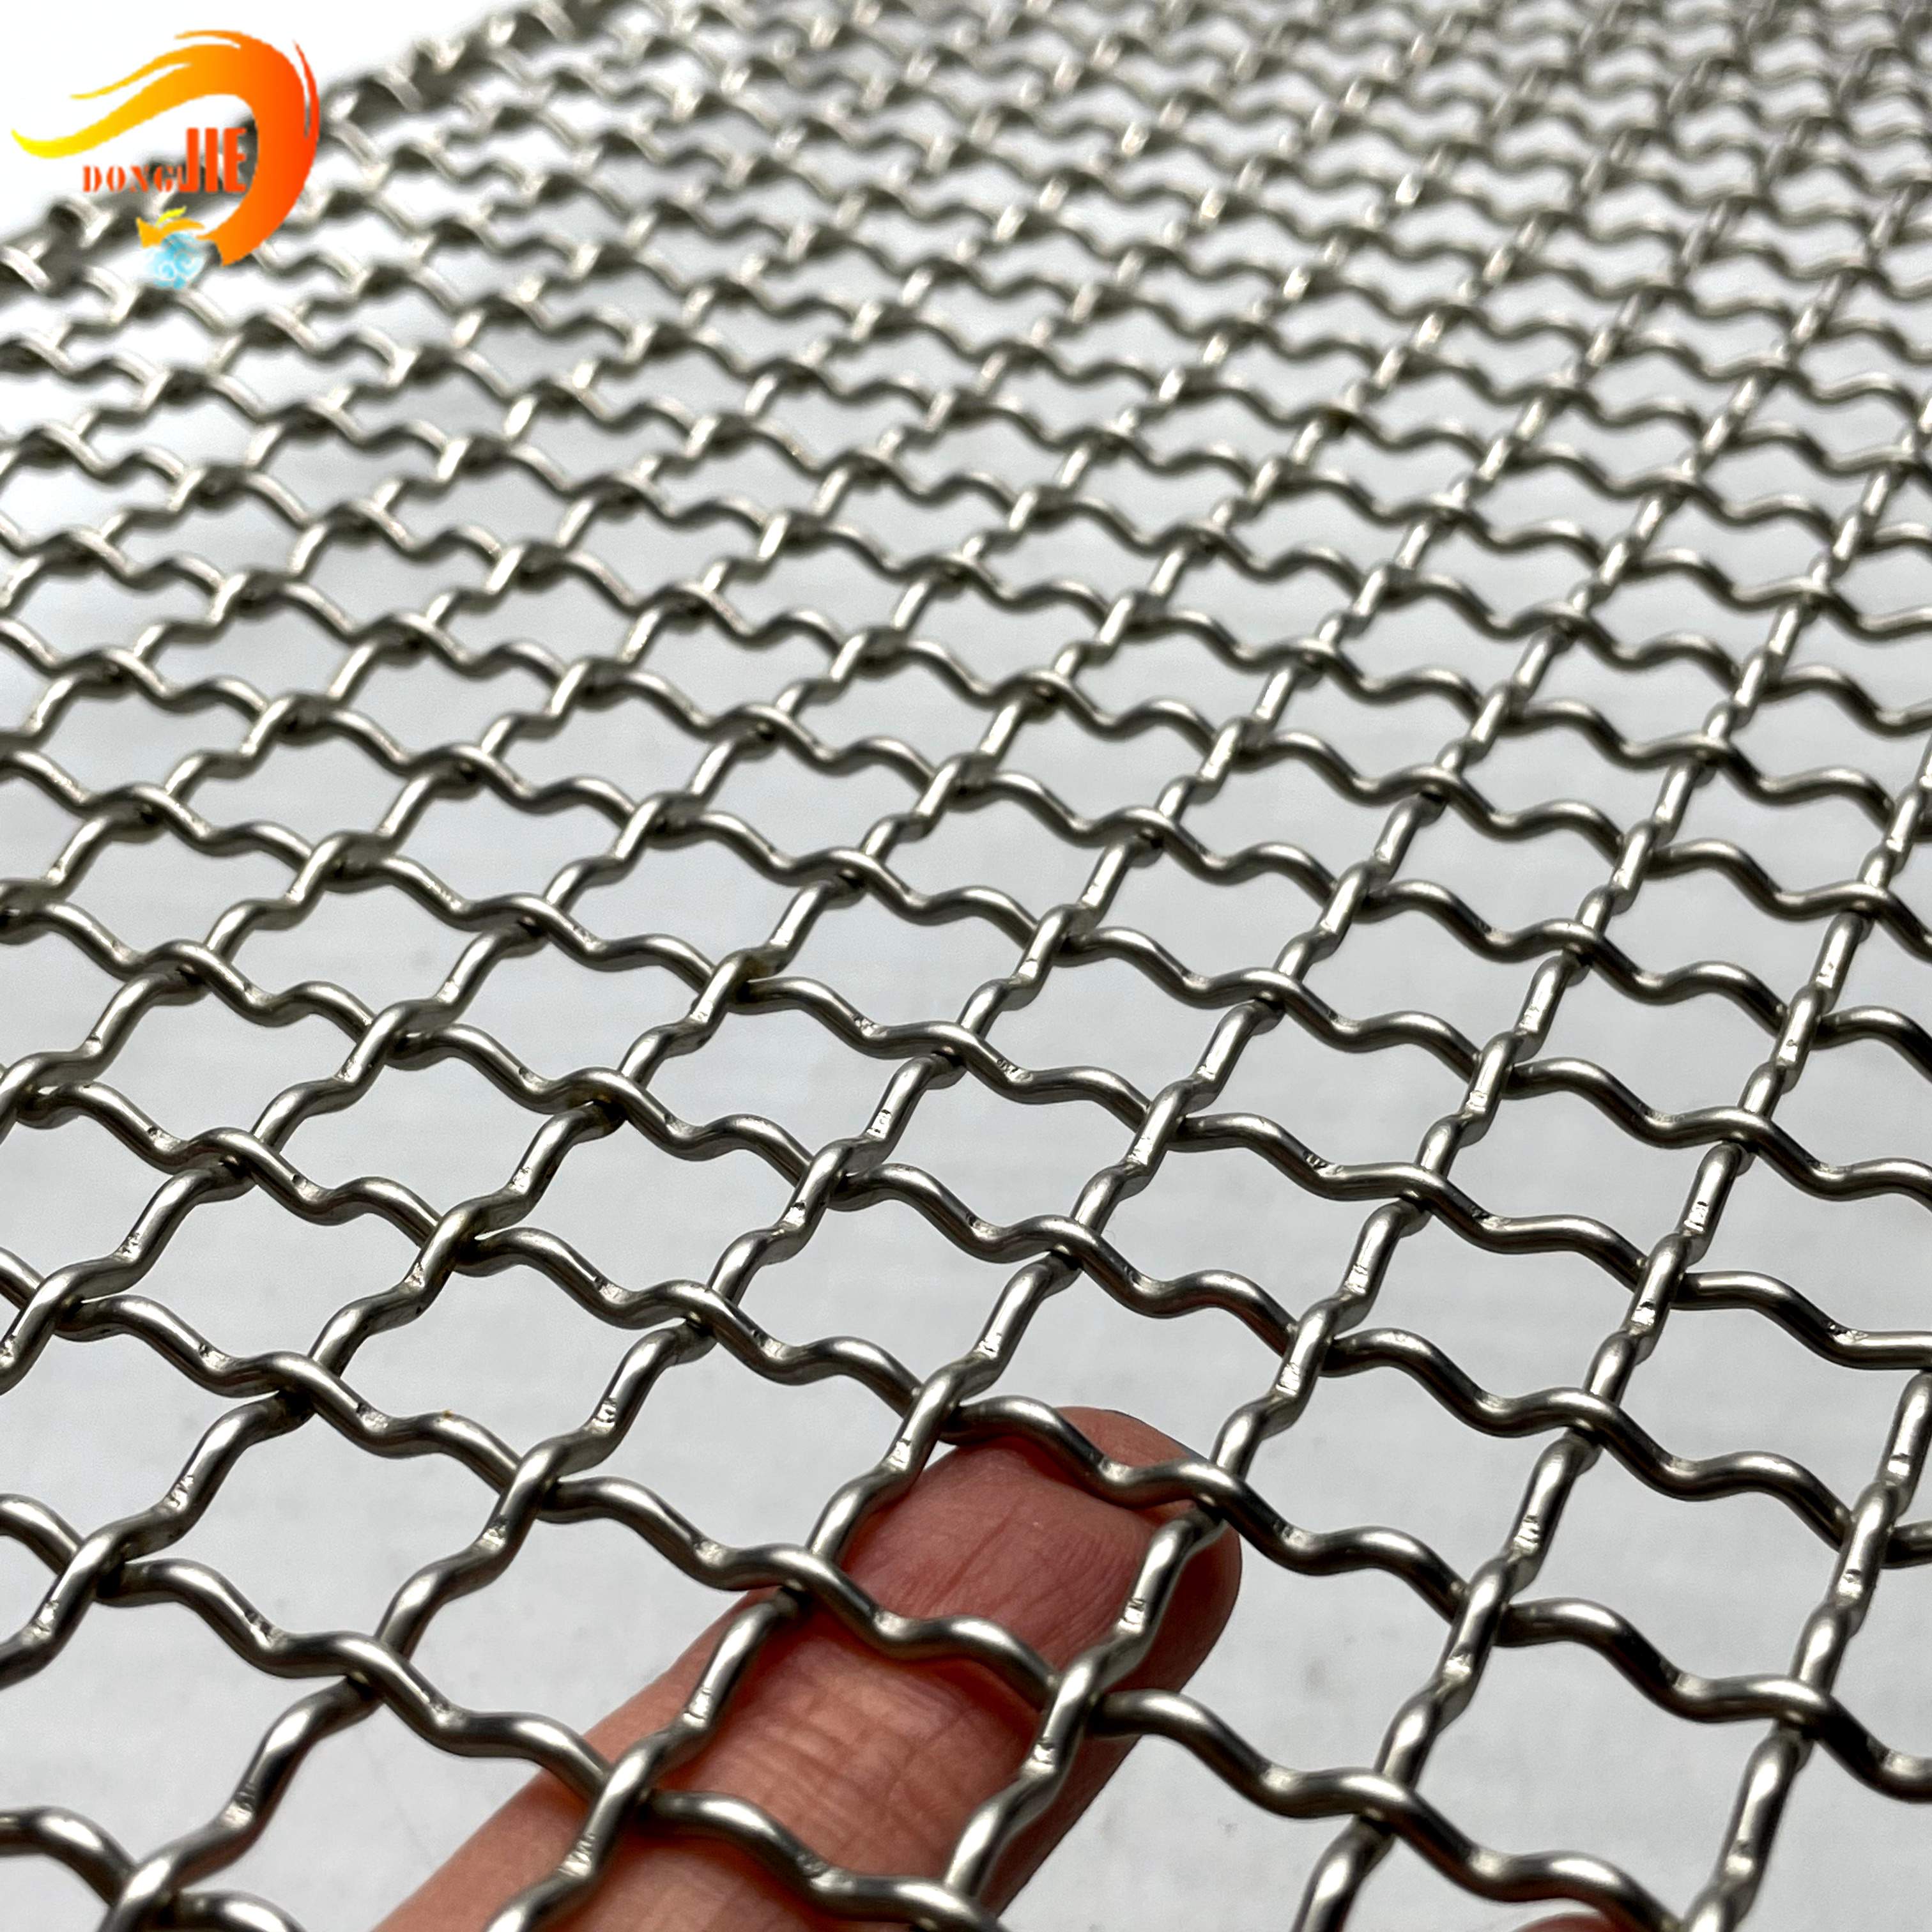 Bbq Cooking Mesh Factory, China Bbq Cooking Mesh,Wholesale Bbq Grill Mesh,Steel Mesh For Bbq,Bbq Mesh Factories,Bbq Grill Metal Mesh Factory,Outdoor Bbq Grill Mesh Manufacturer